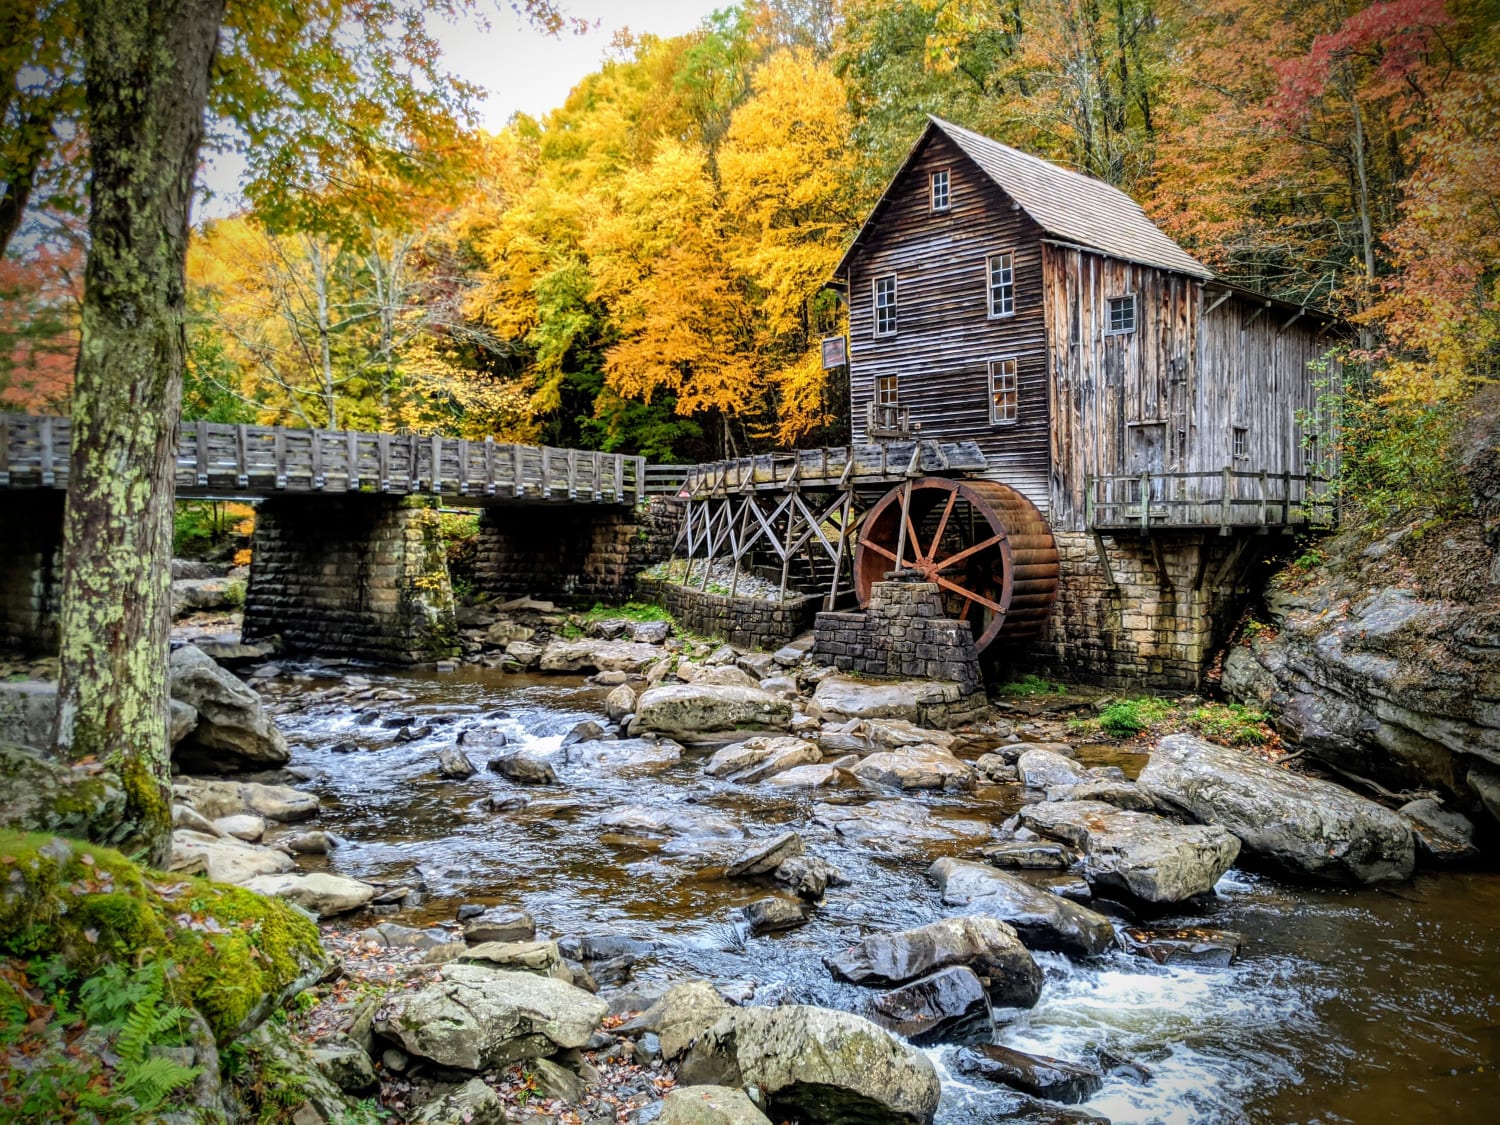 ITAP of an old grist mill on a stream